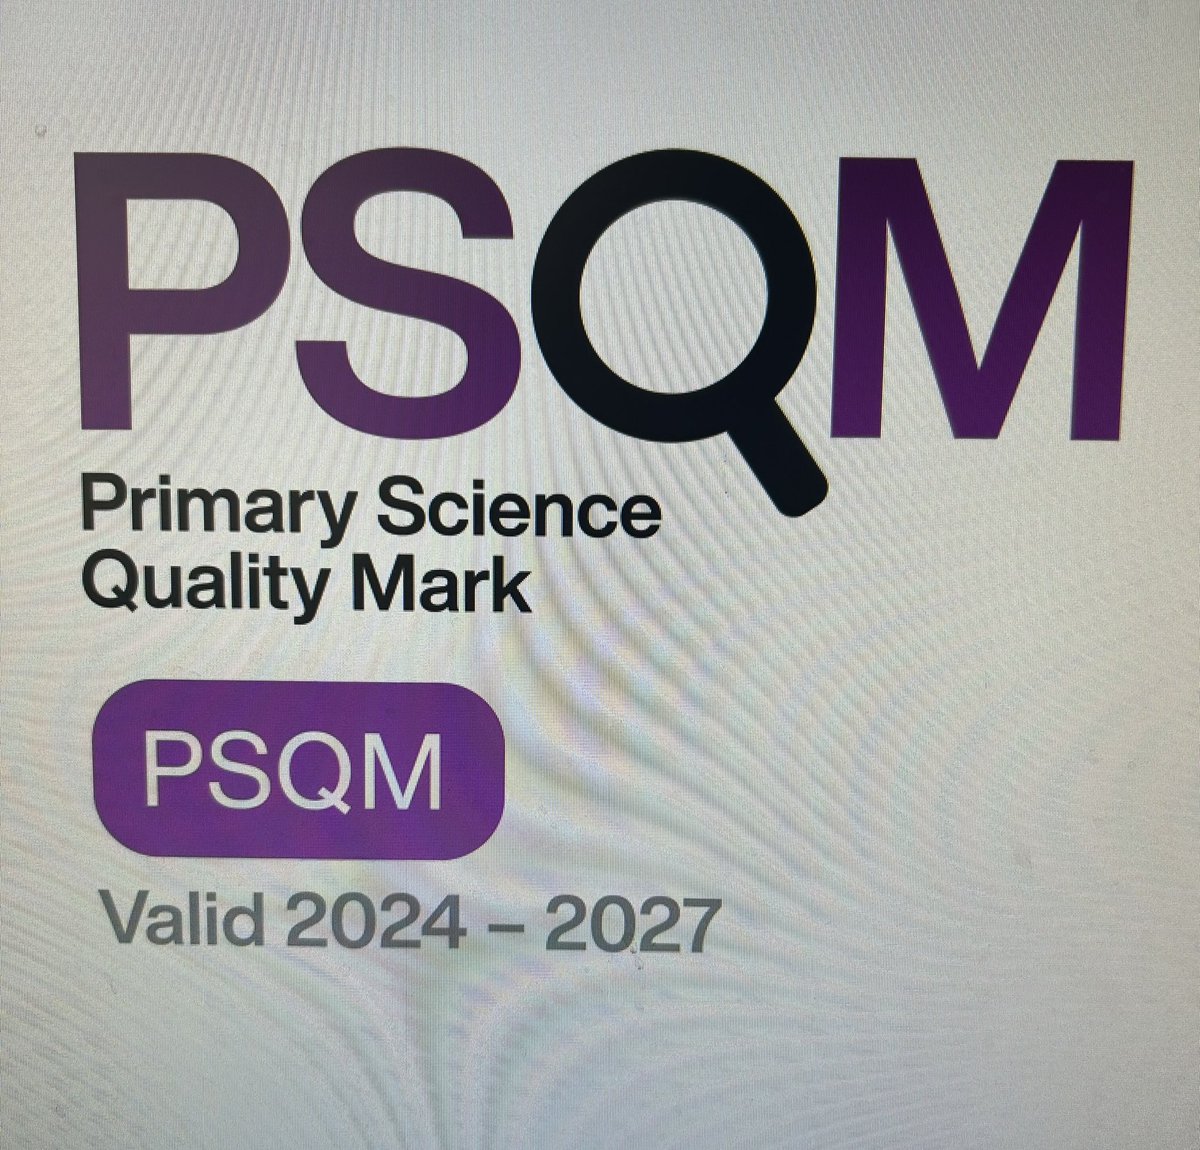 It’s a big day in Pencae- we’ve received our PSQM accreditation for all the Science and technology experiences that we offer our pupils! Very proud 💜💛 Diolch @Psqm_HQ @hayes_haf